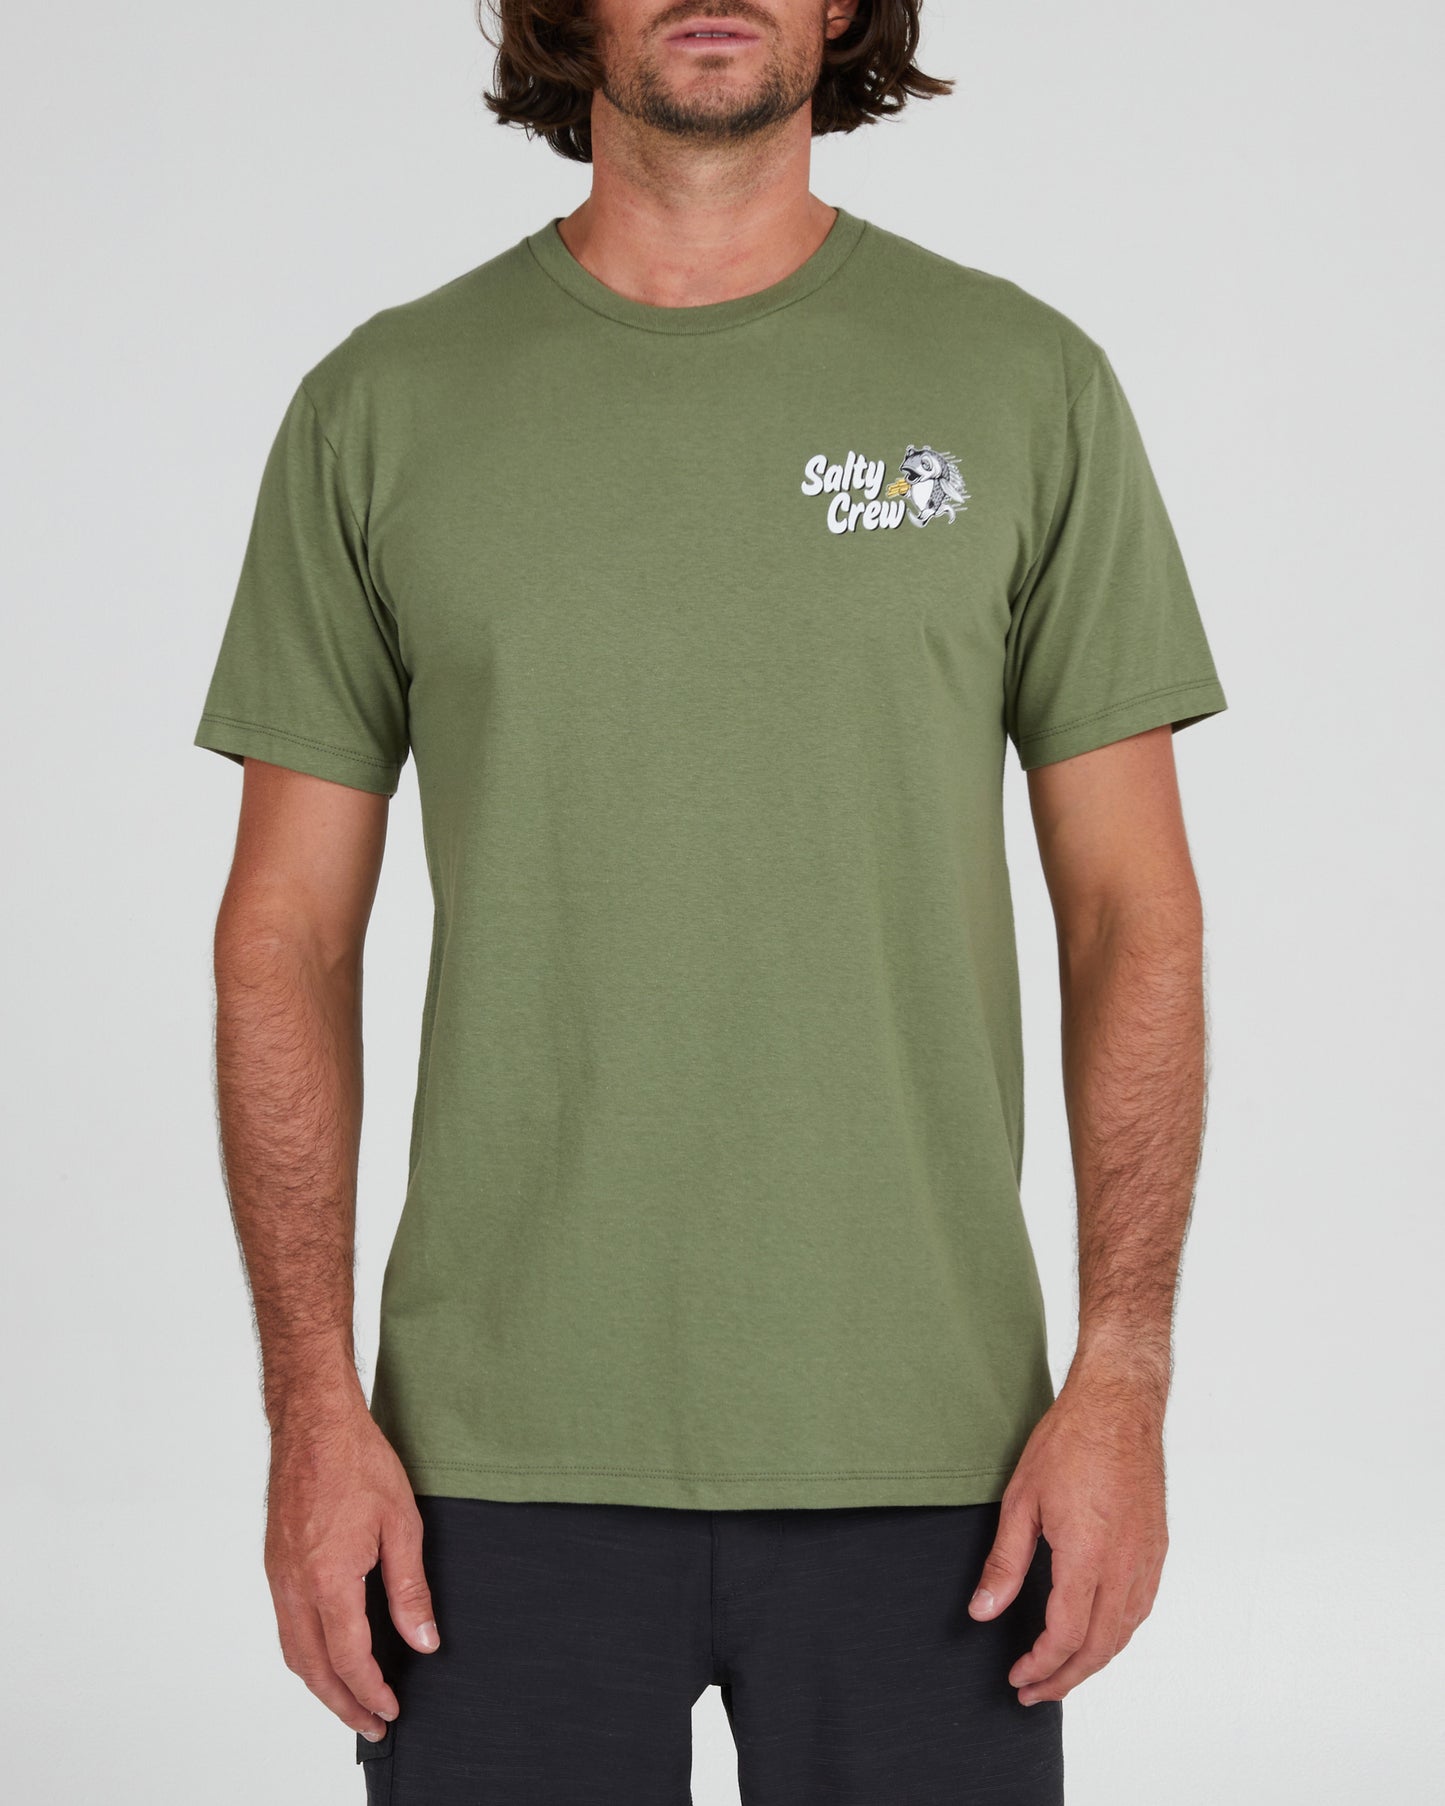 On body front of the Fish and Chips Sage Green S/S Premium Tee